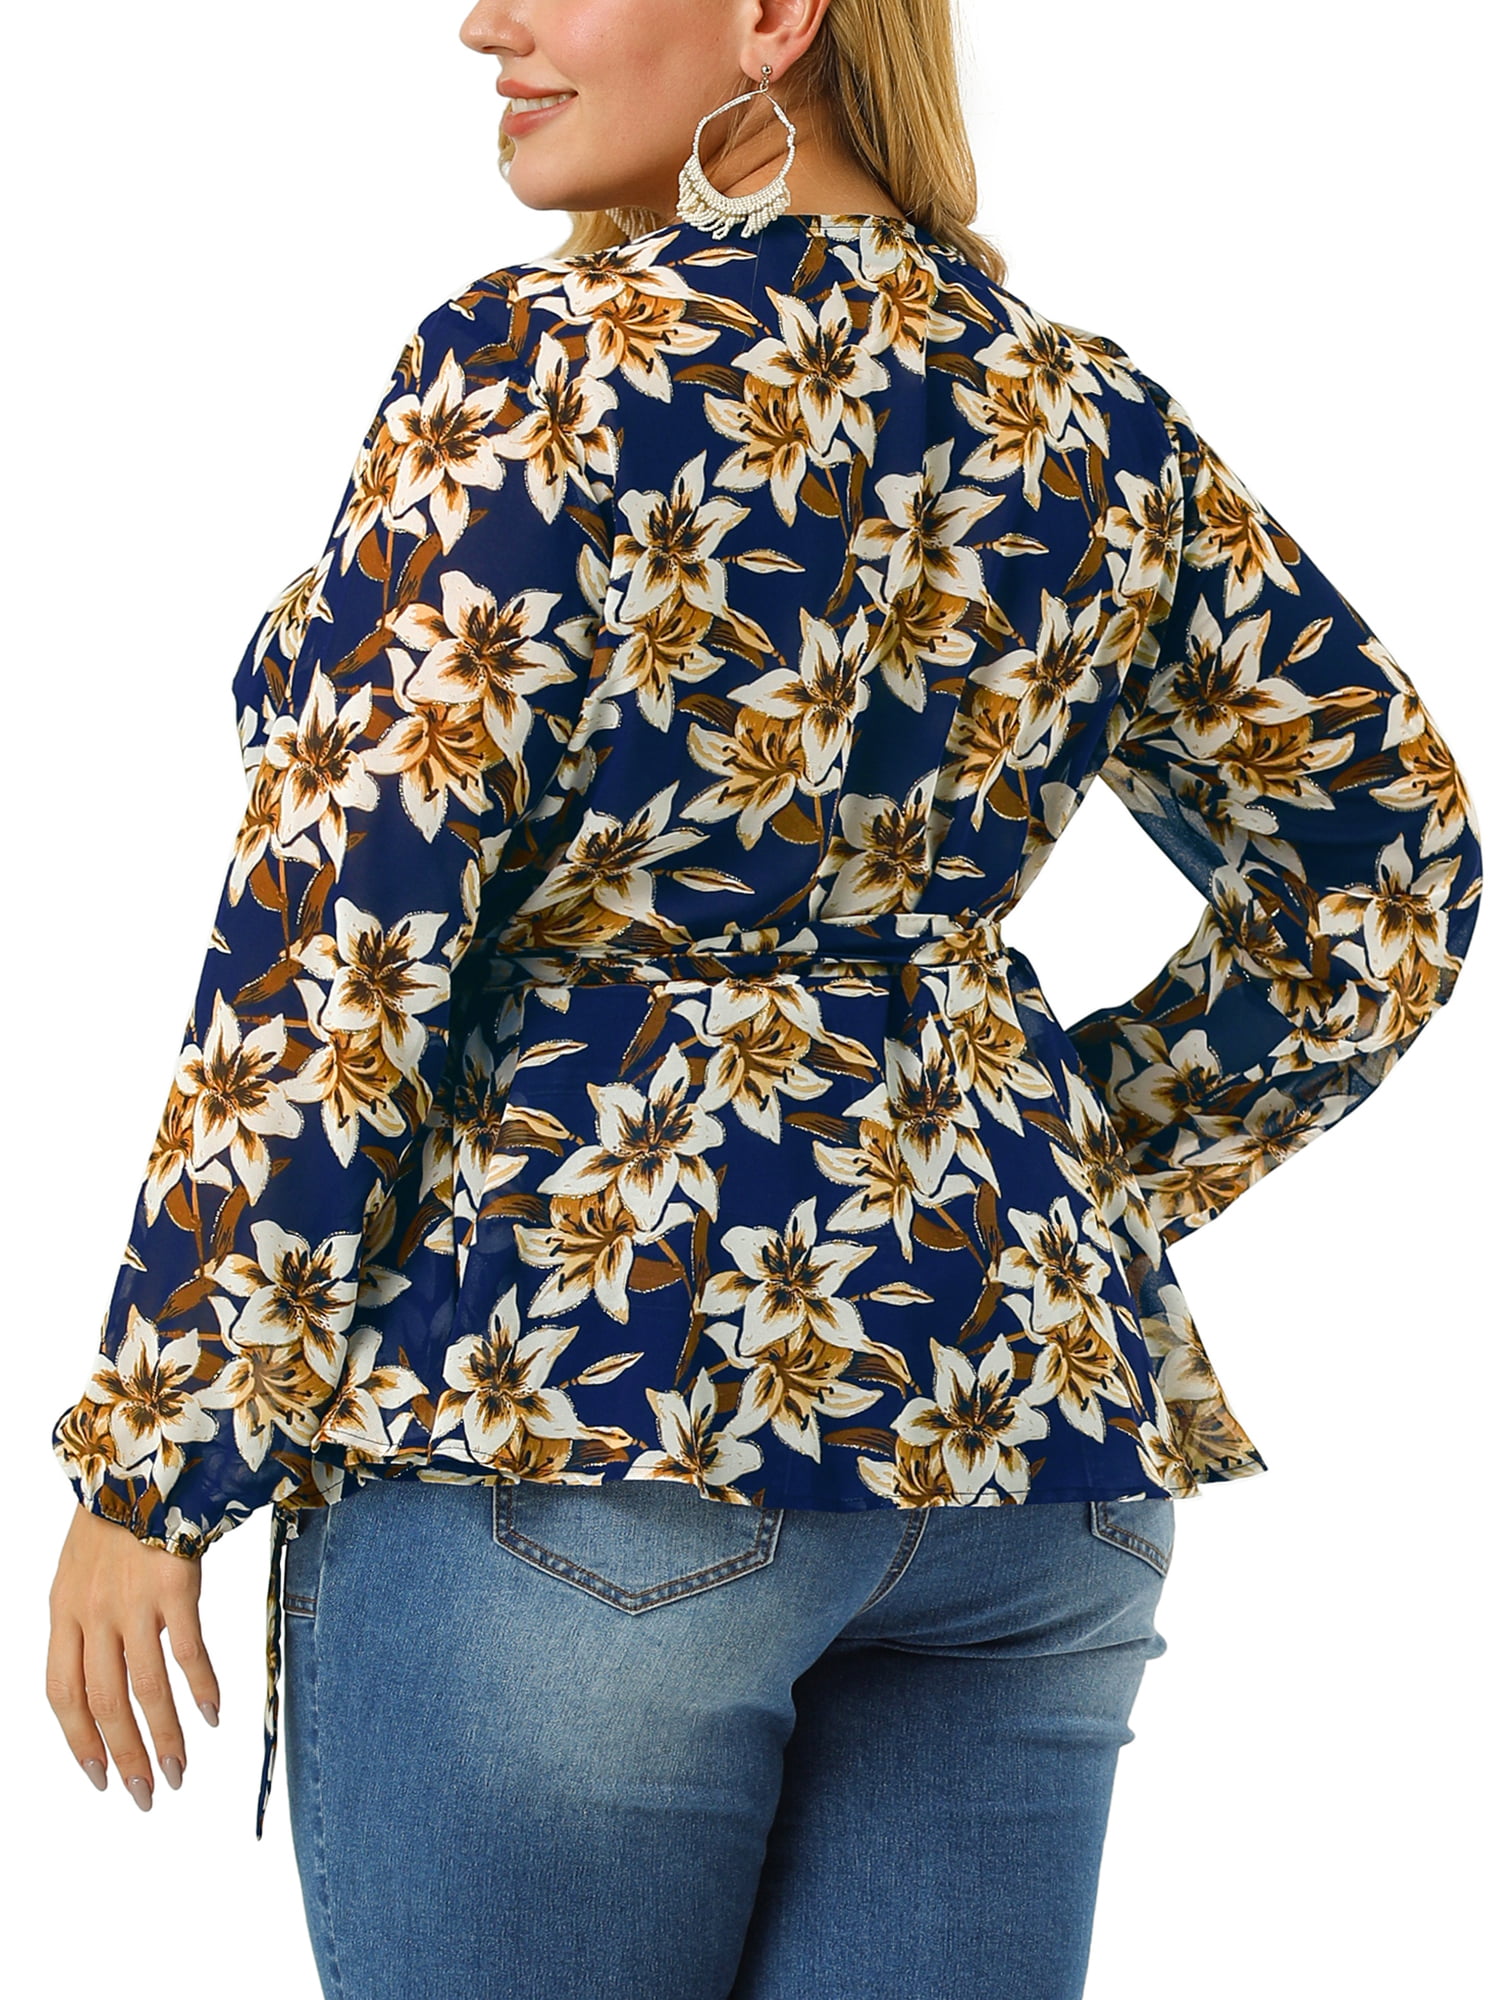 These Flowy Ree Drummond-Style Blouses Are All Under $50